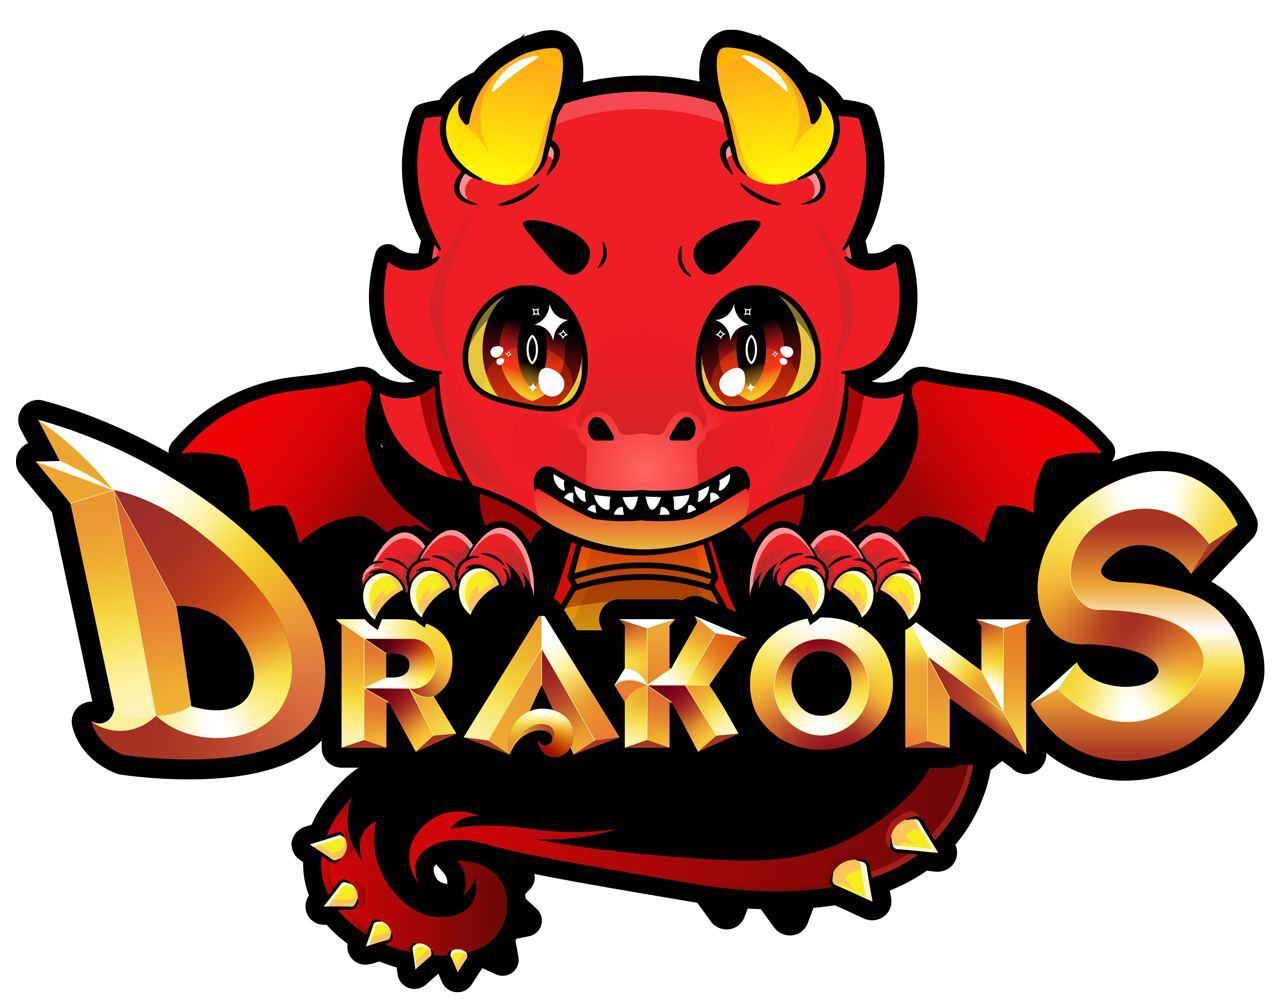 Drakons partners with Mana Games